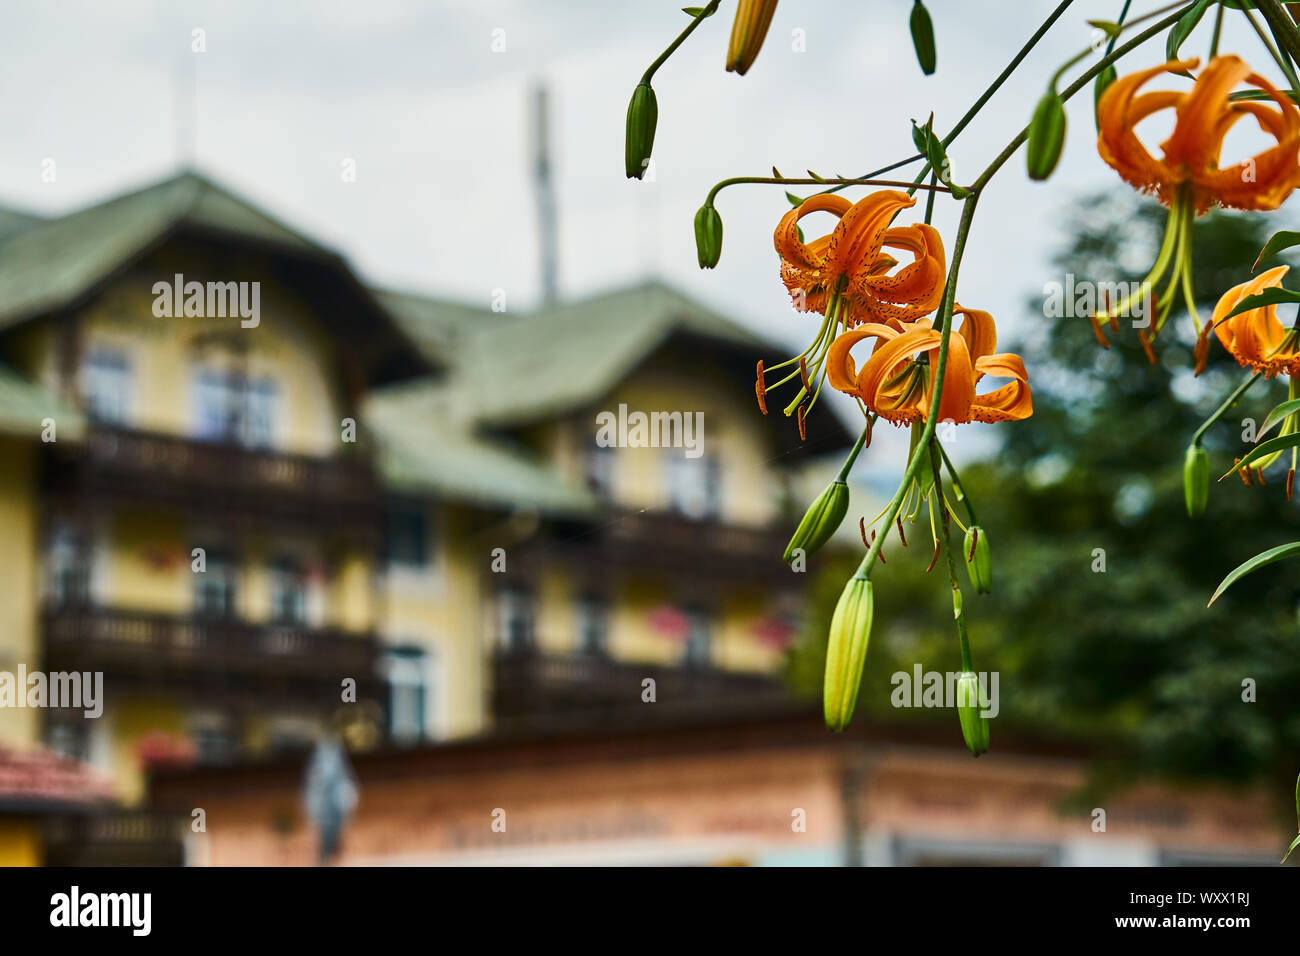 Tiger lily, scientific name: Lilium lancifolium, with orange coloured flowers and long pistils and pollen stems in front of the deliberately blurred b Stock Photo